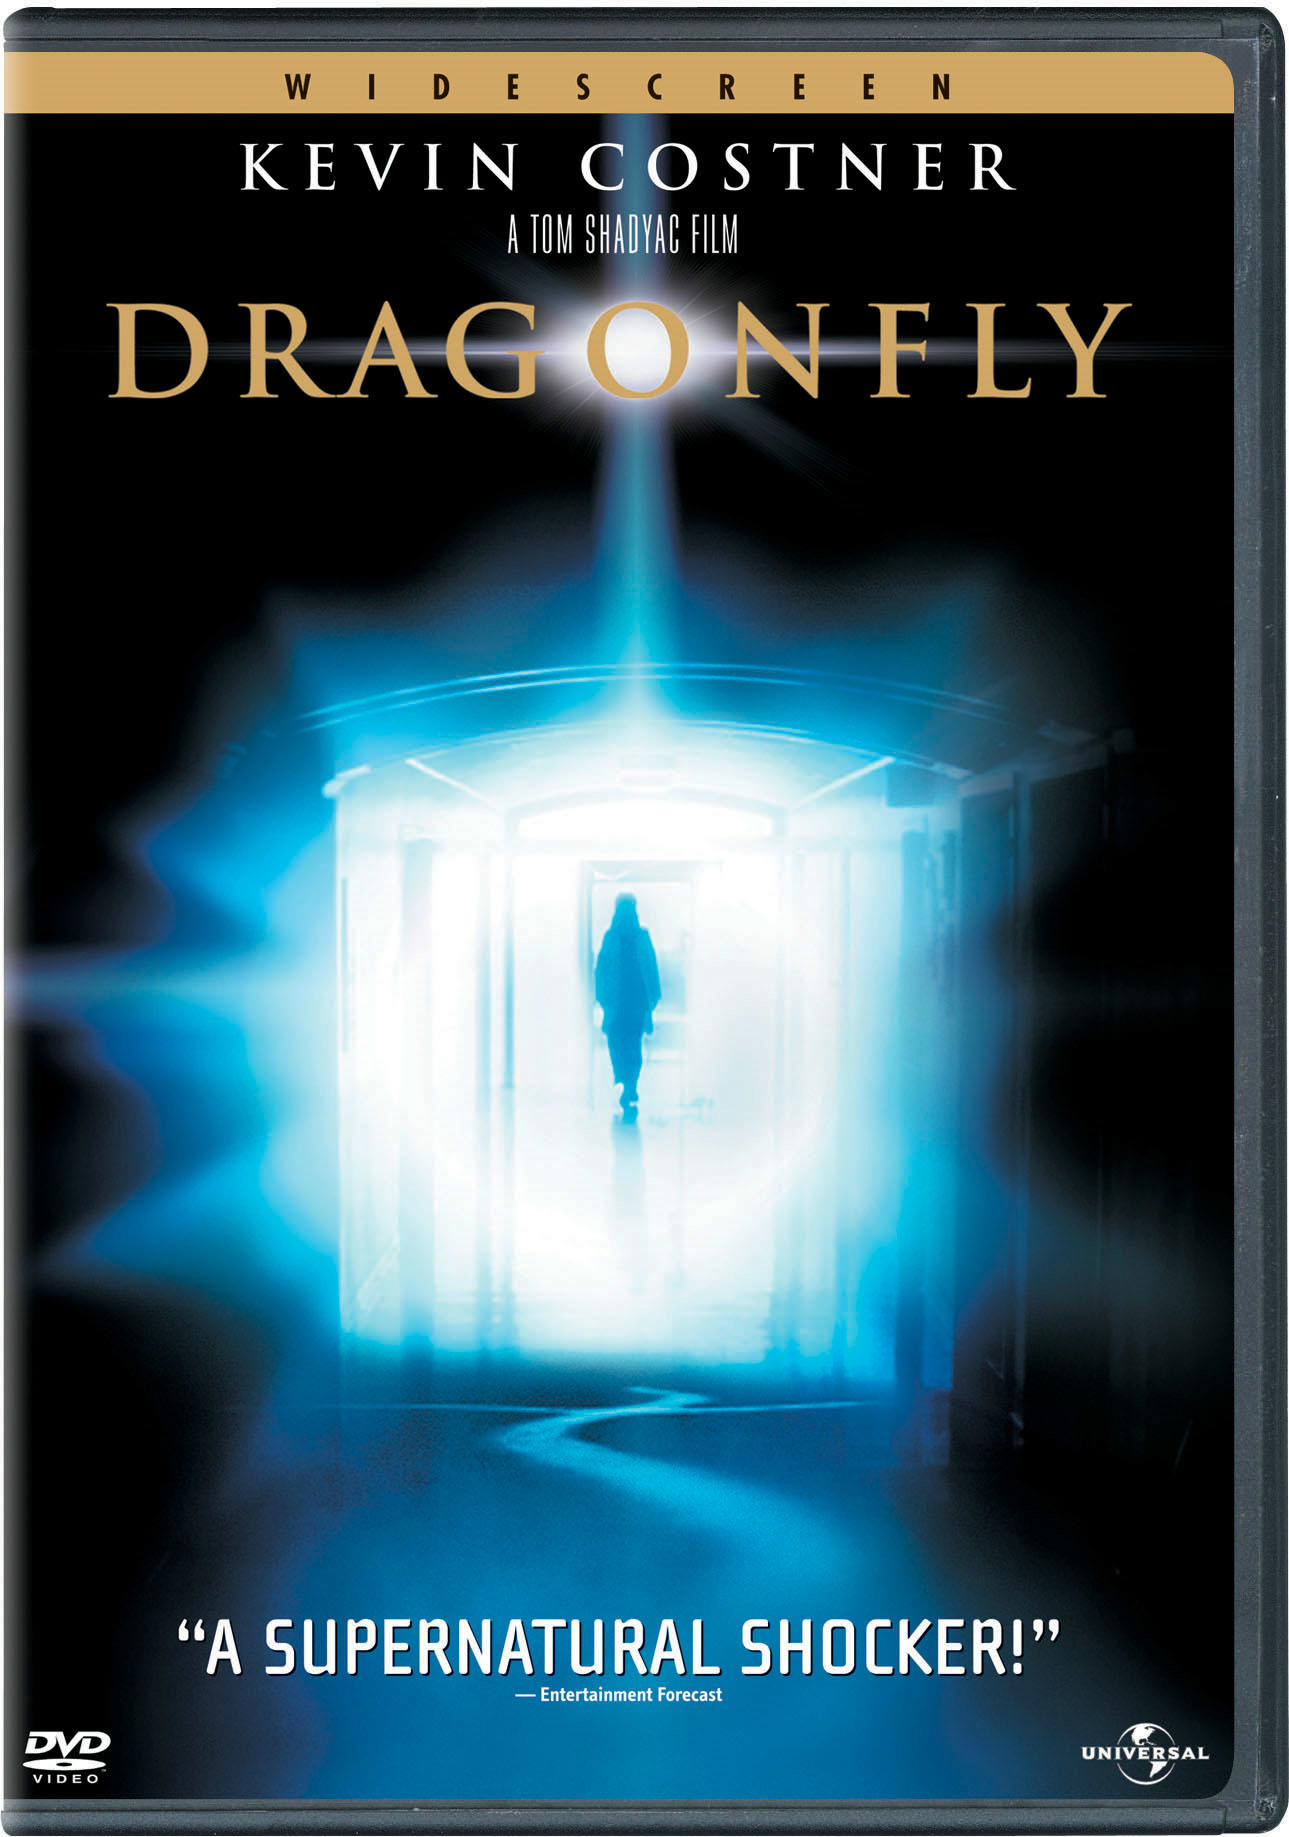 Dragonfly (DVD Widescreen) - DVD [ 2002 ]  - Thriller Movies On DVD - Movies On GRUV